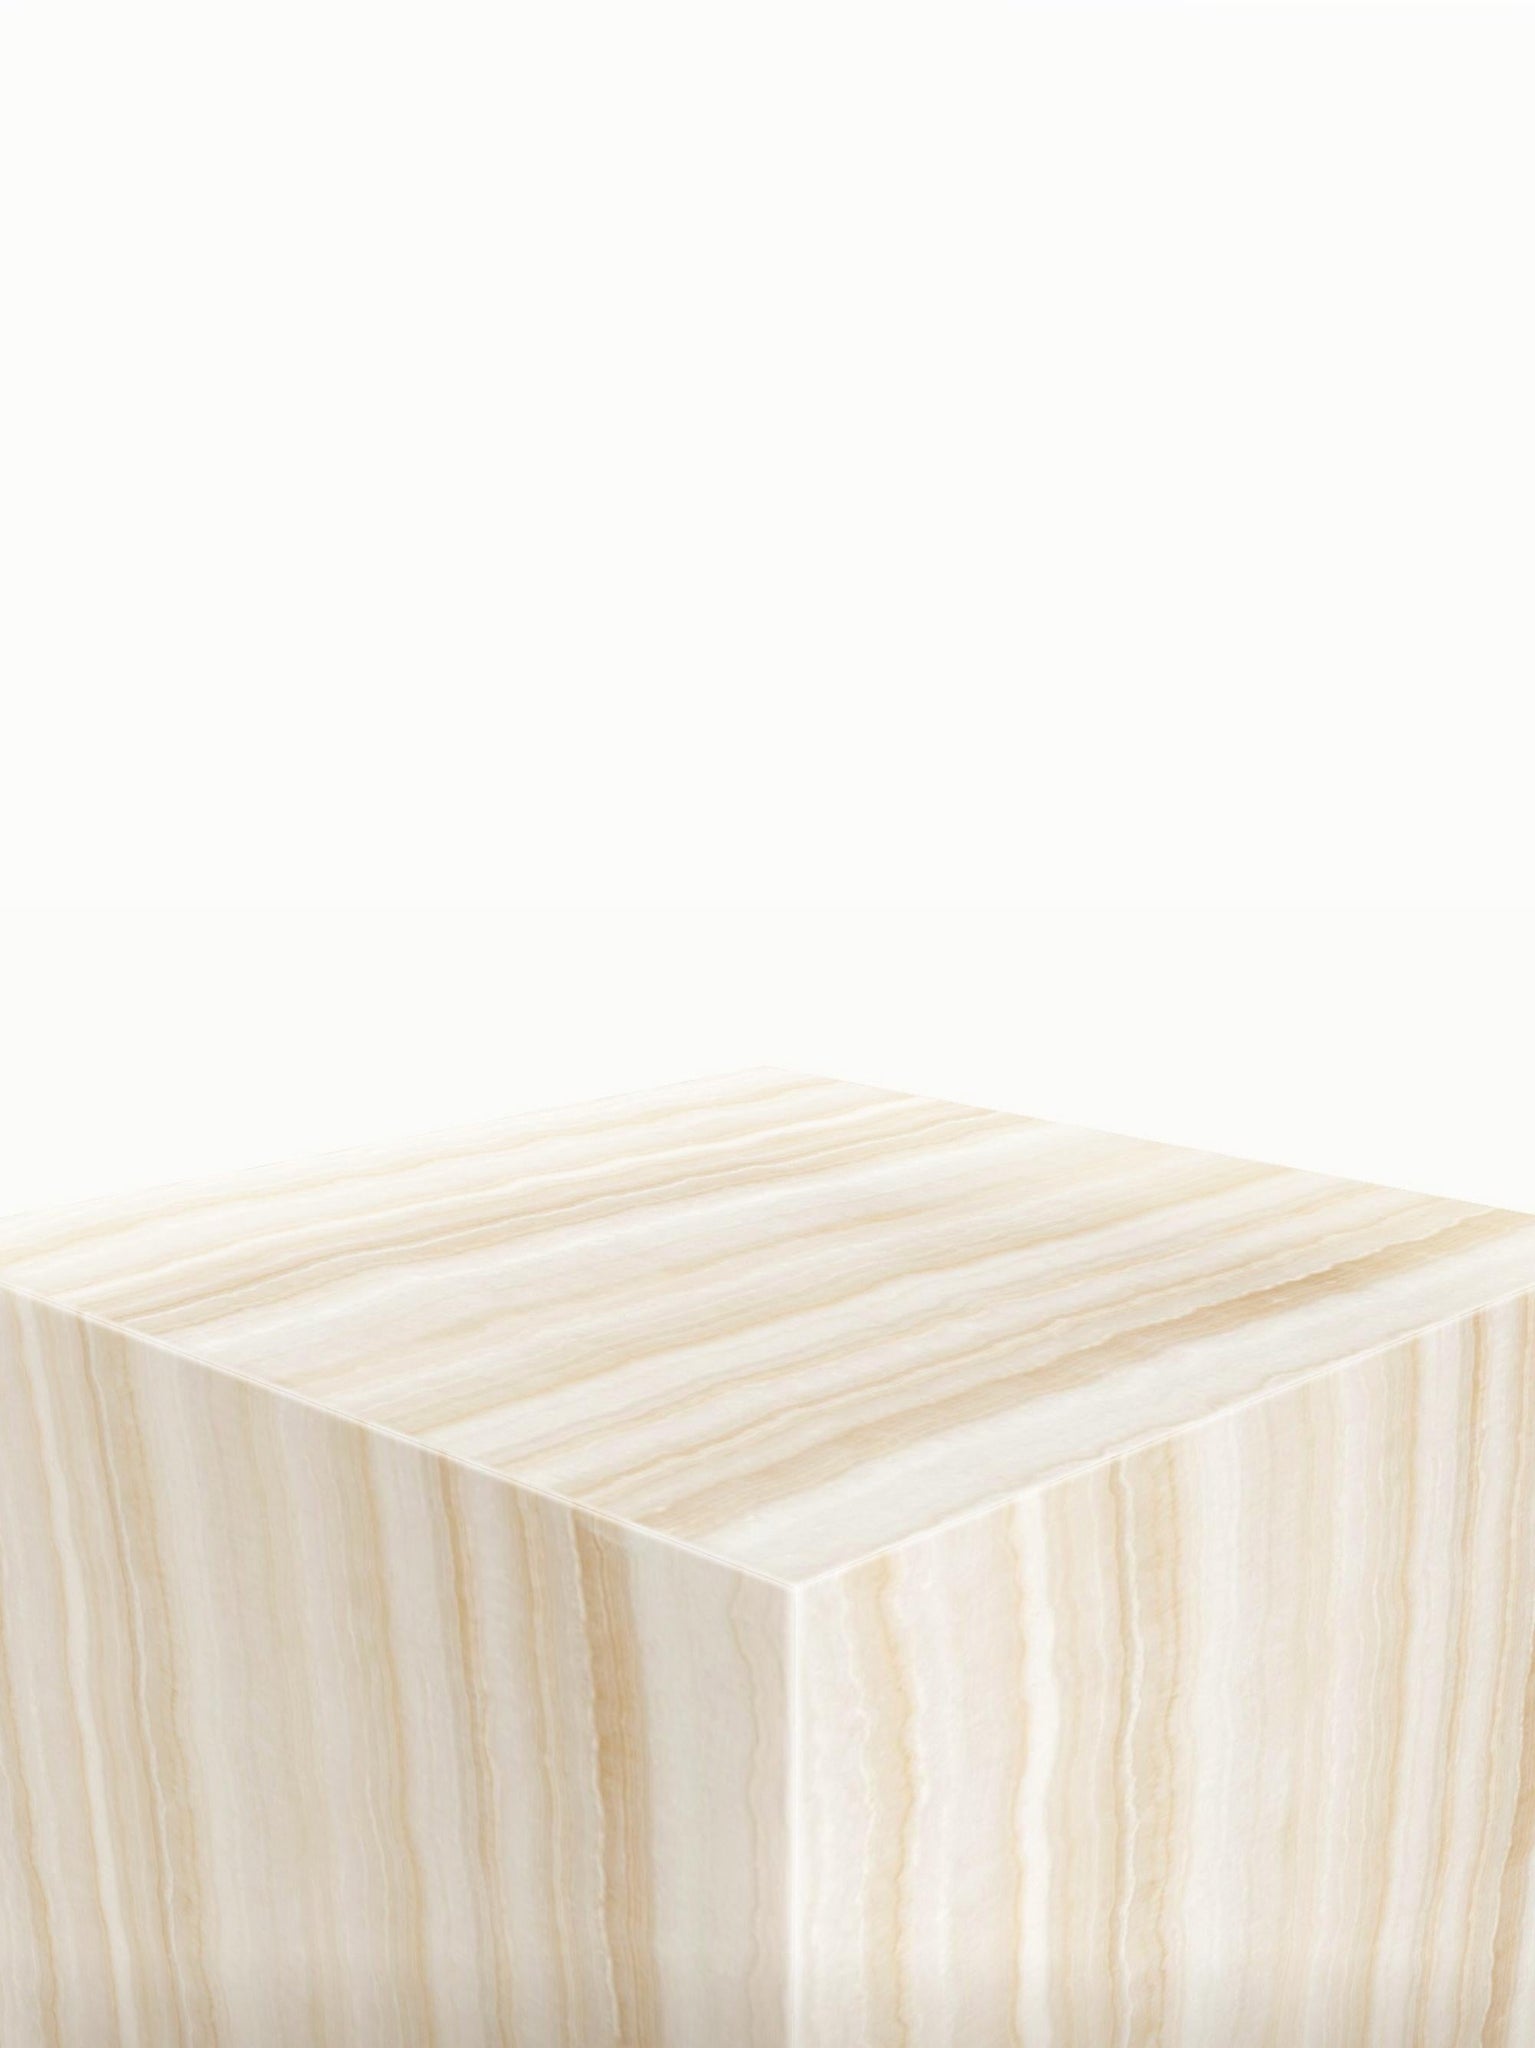 [Made-to-Order] FORTE Plinth – no. 80